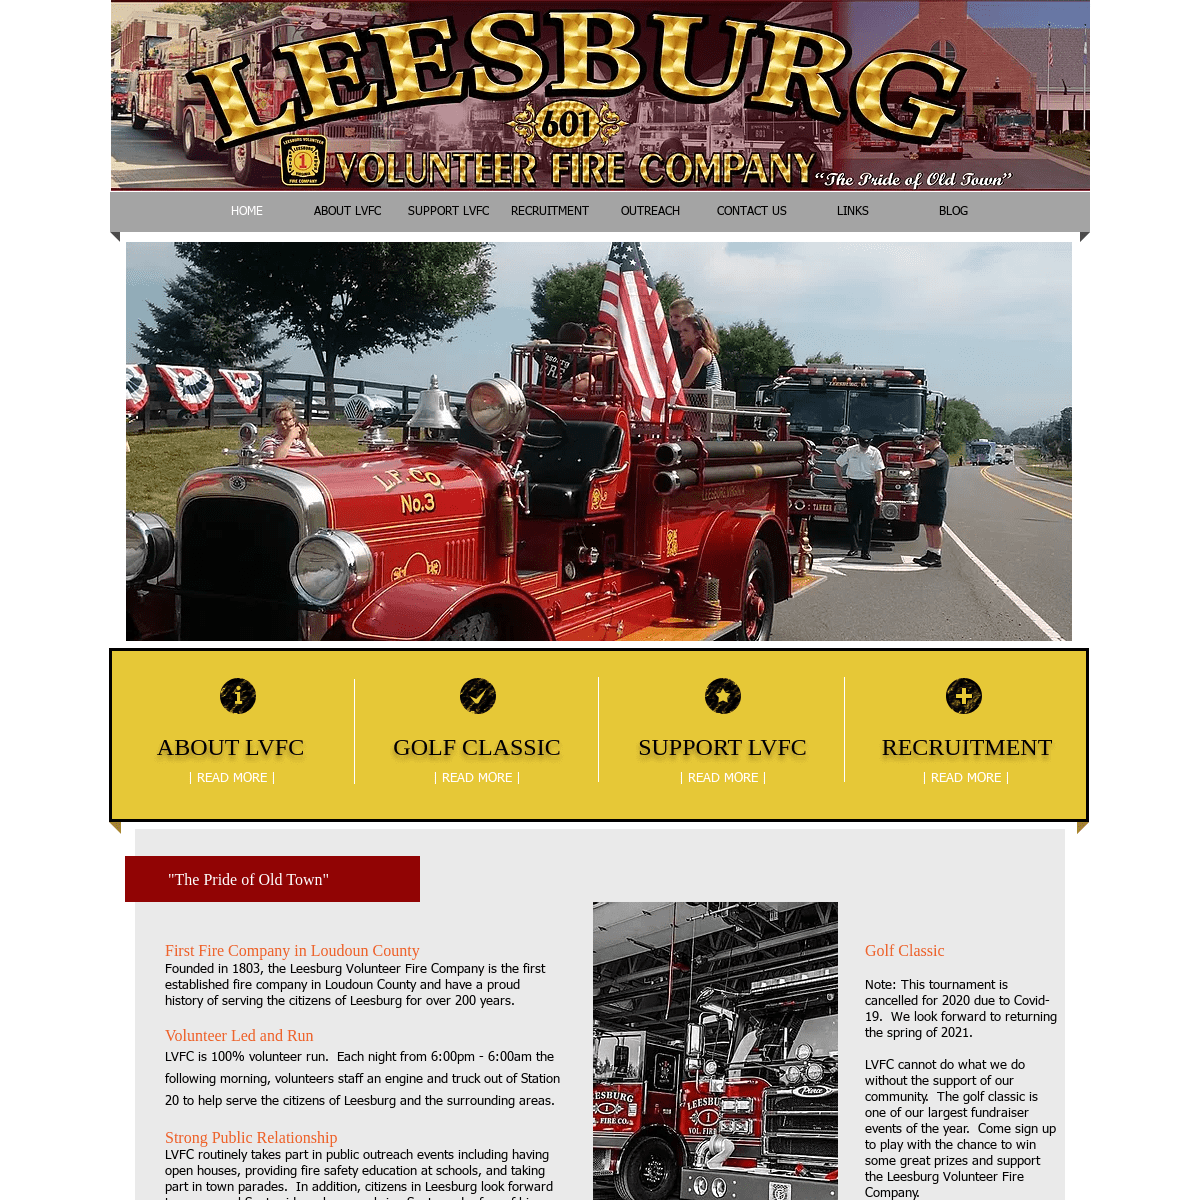 A complete backup of https://leesburgfire.org